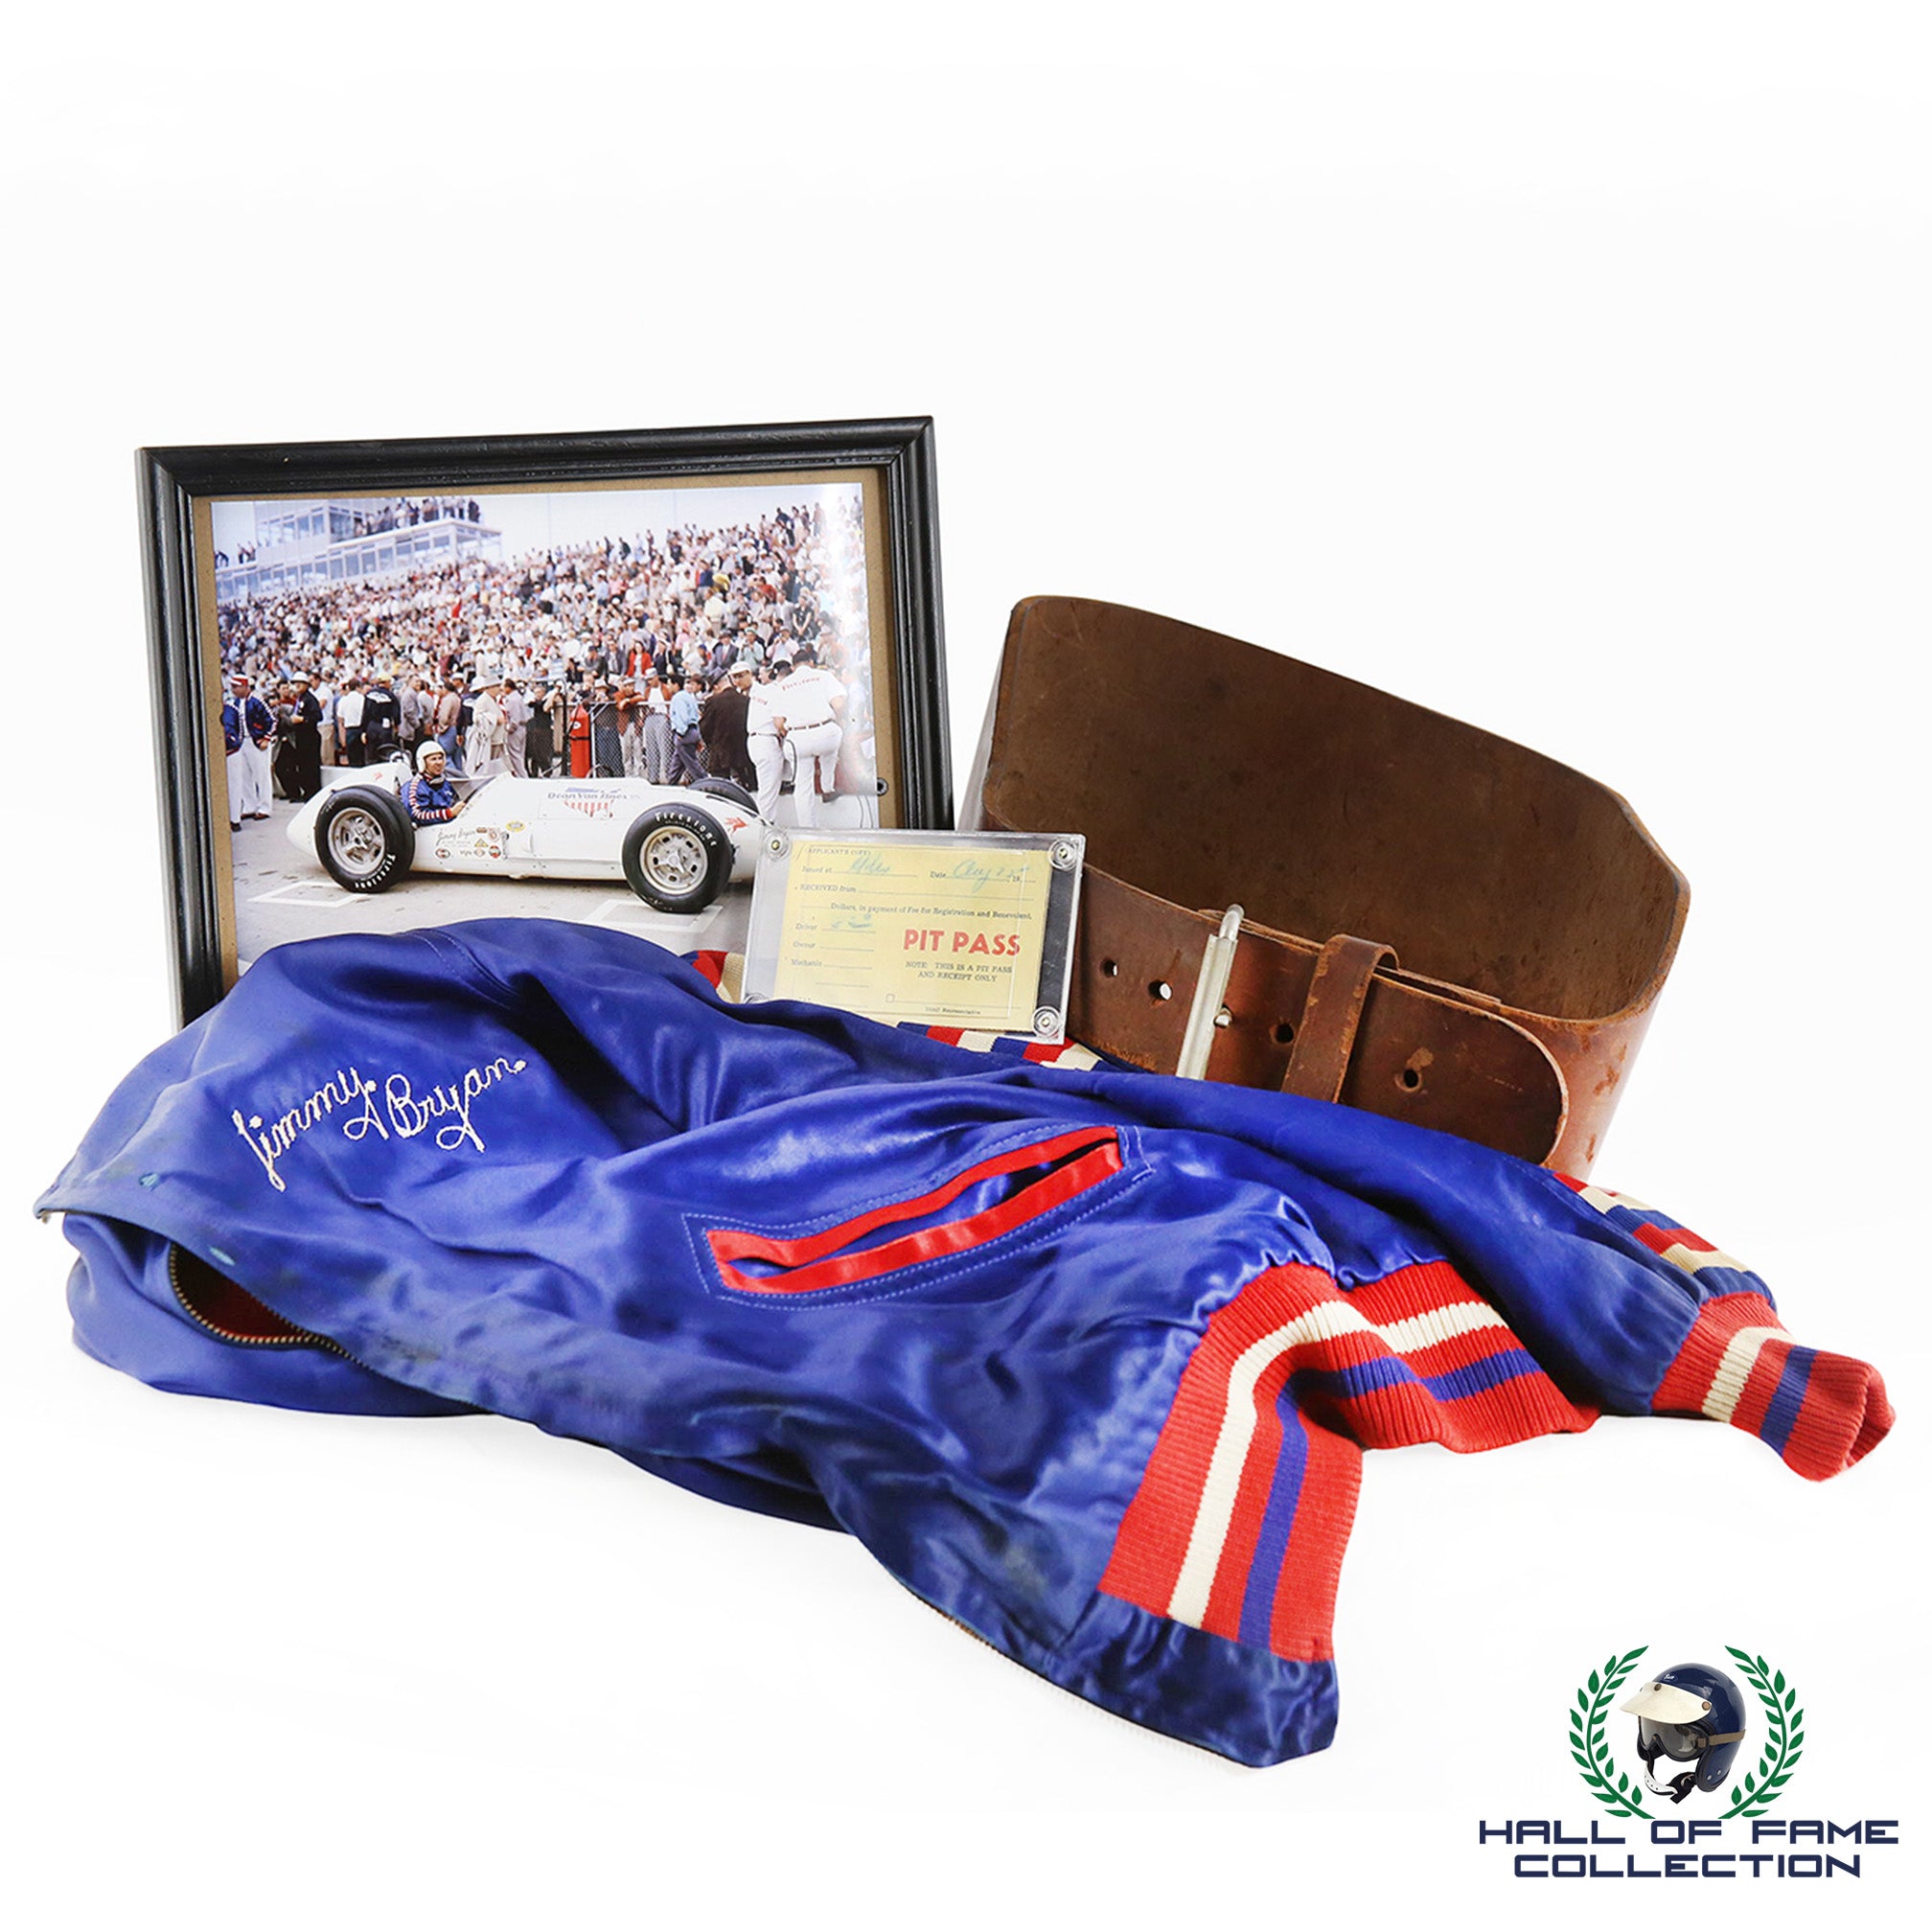 1957 Jimmy Bryan Race Worn Indy 500 Jacket, Belt and Signed Pit Pass